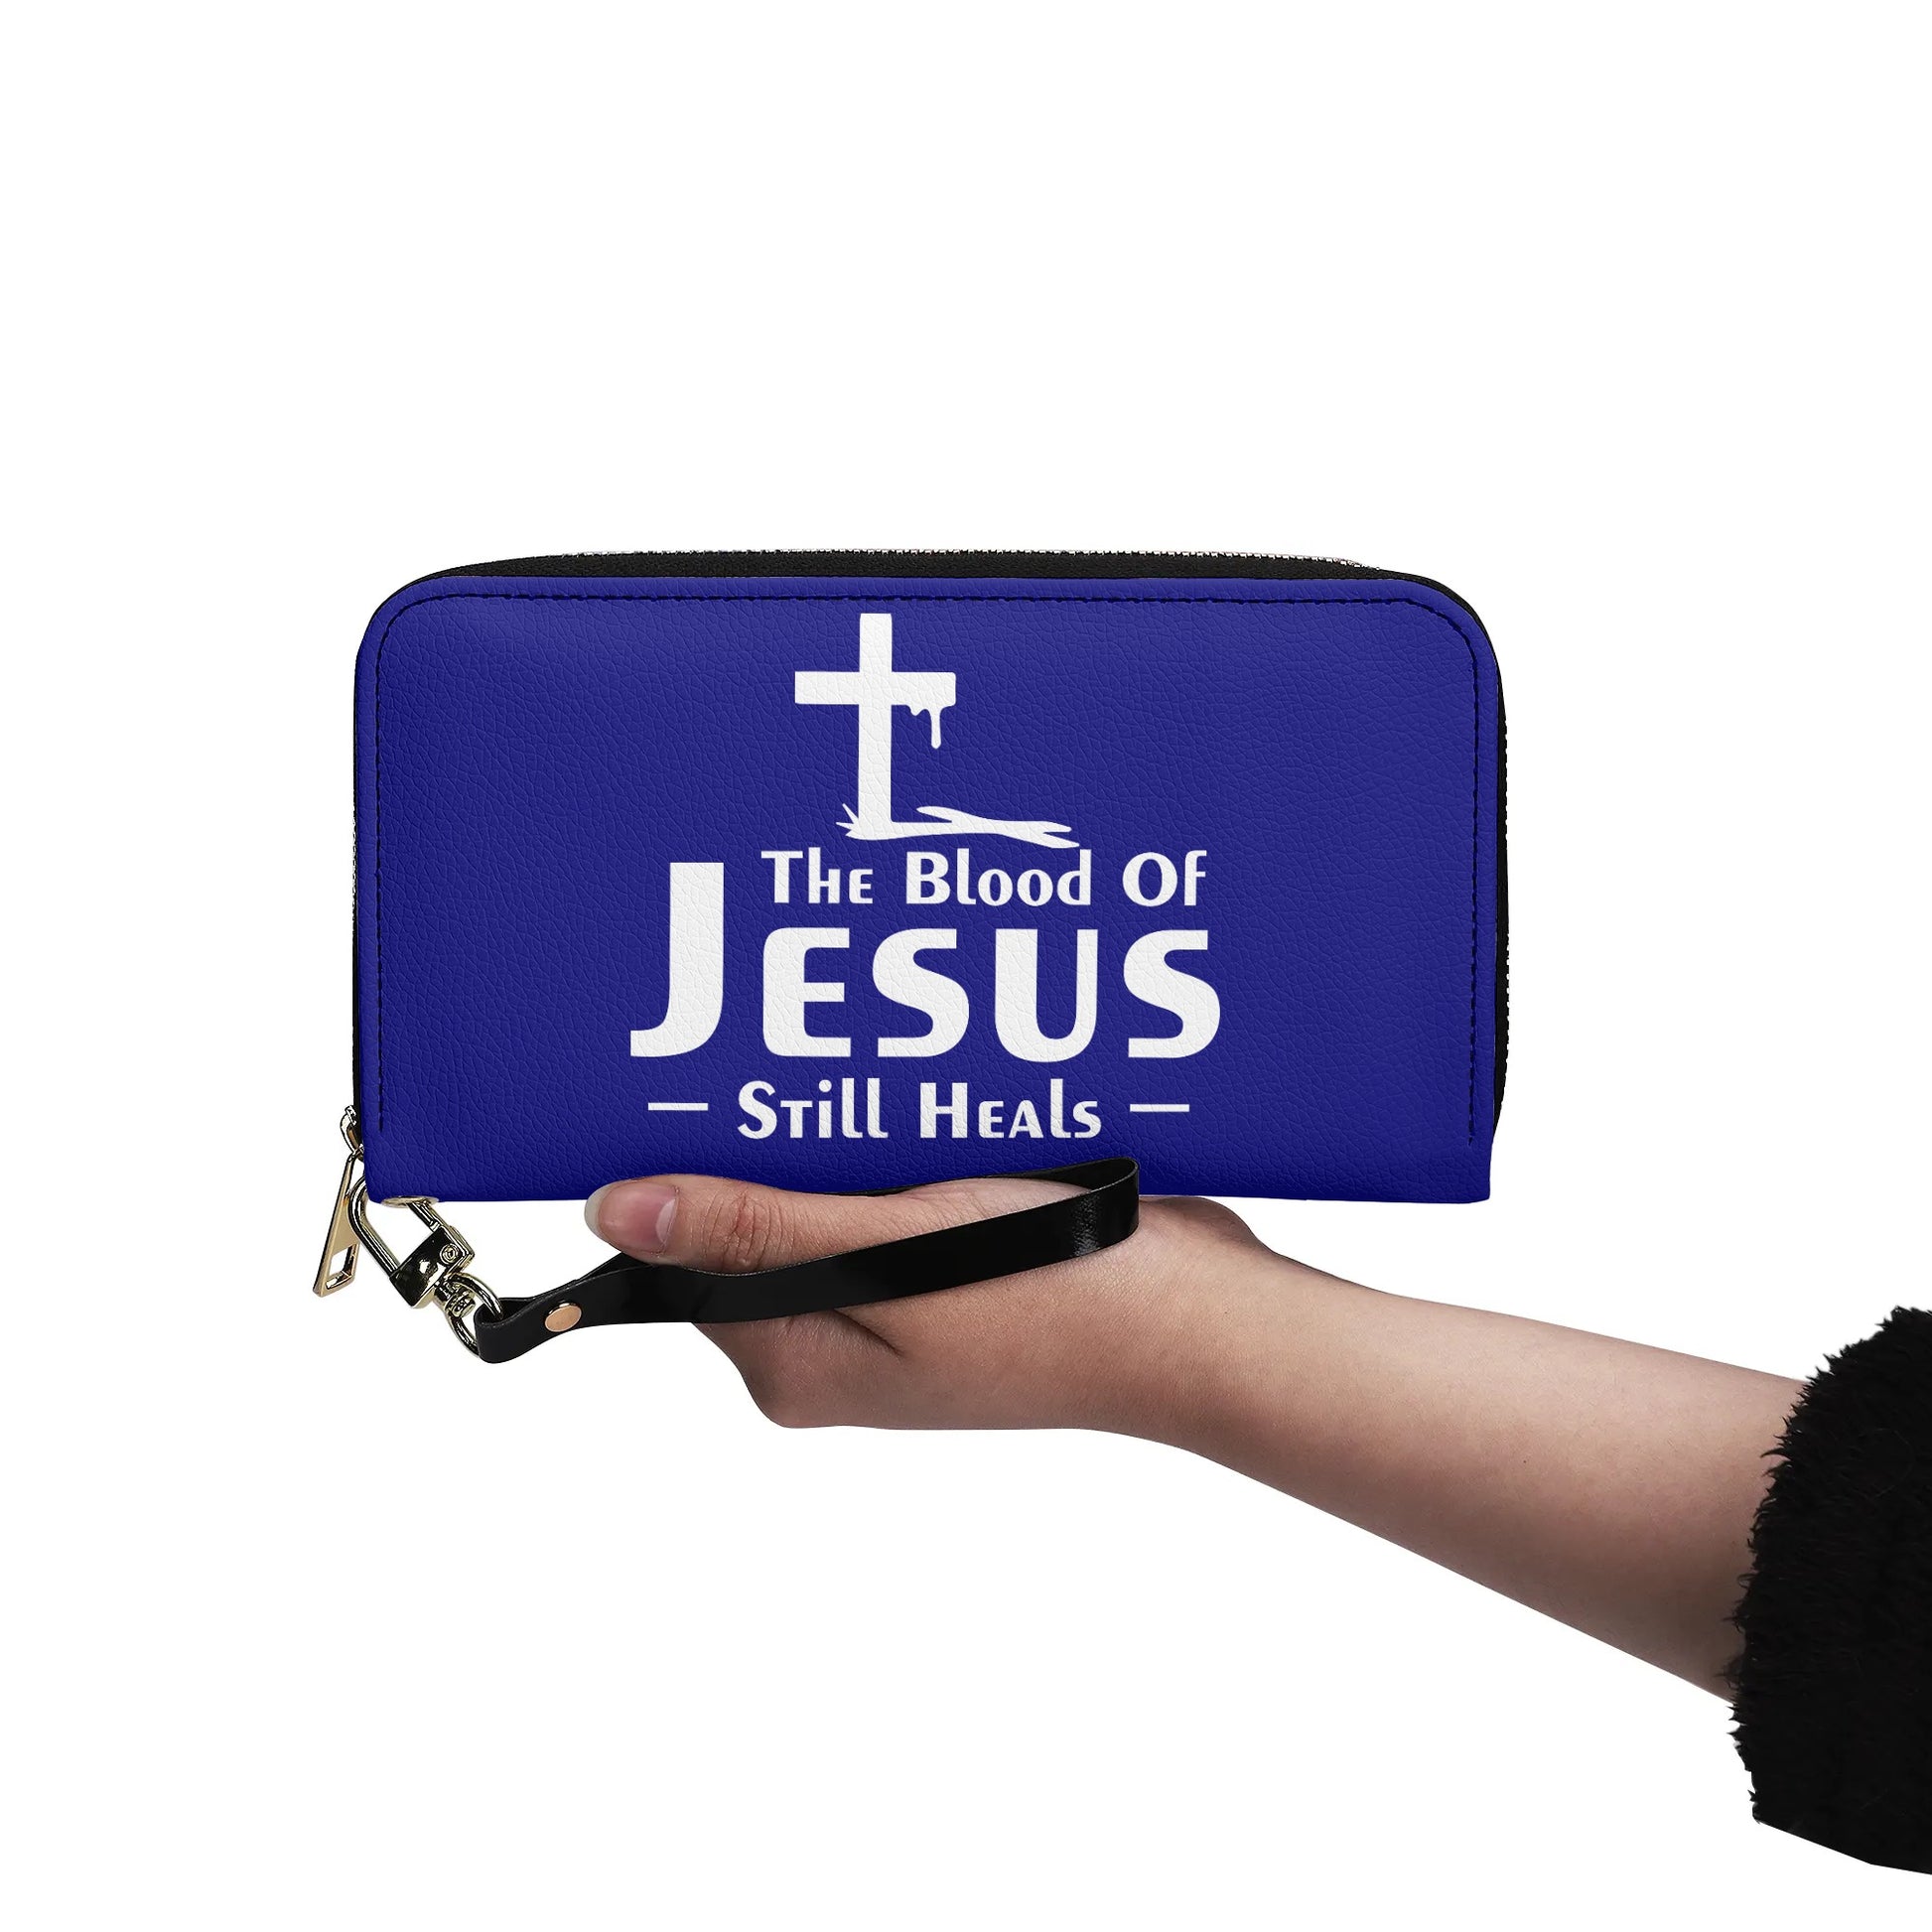 The Blood Of Jesus Still Heals PU Leather Womens Christian Wallet popcustoms